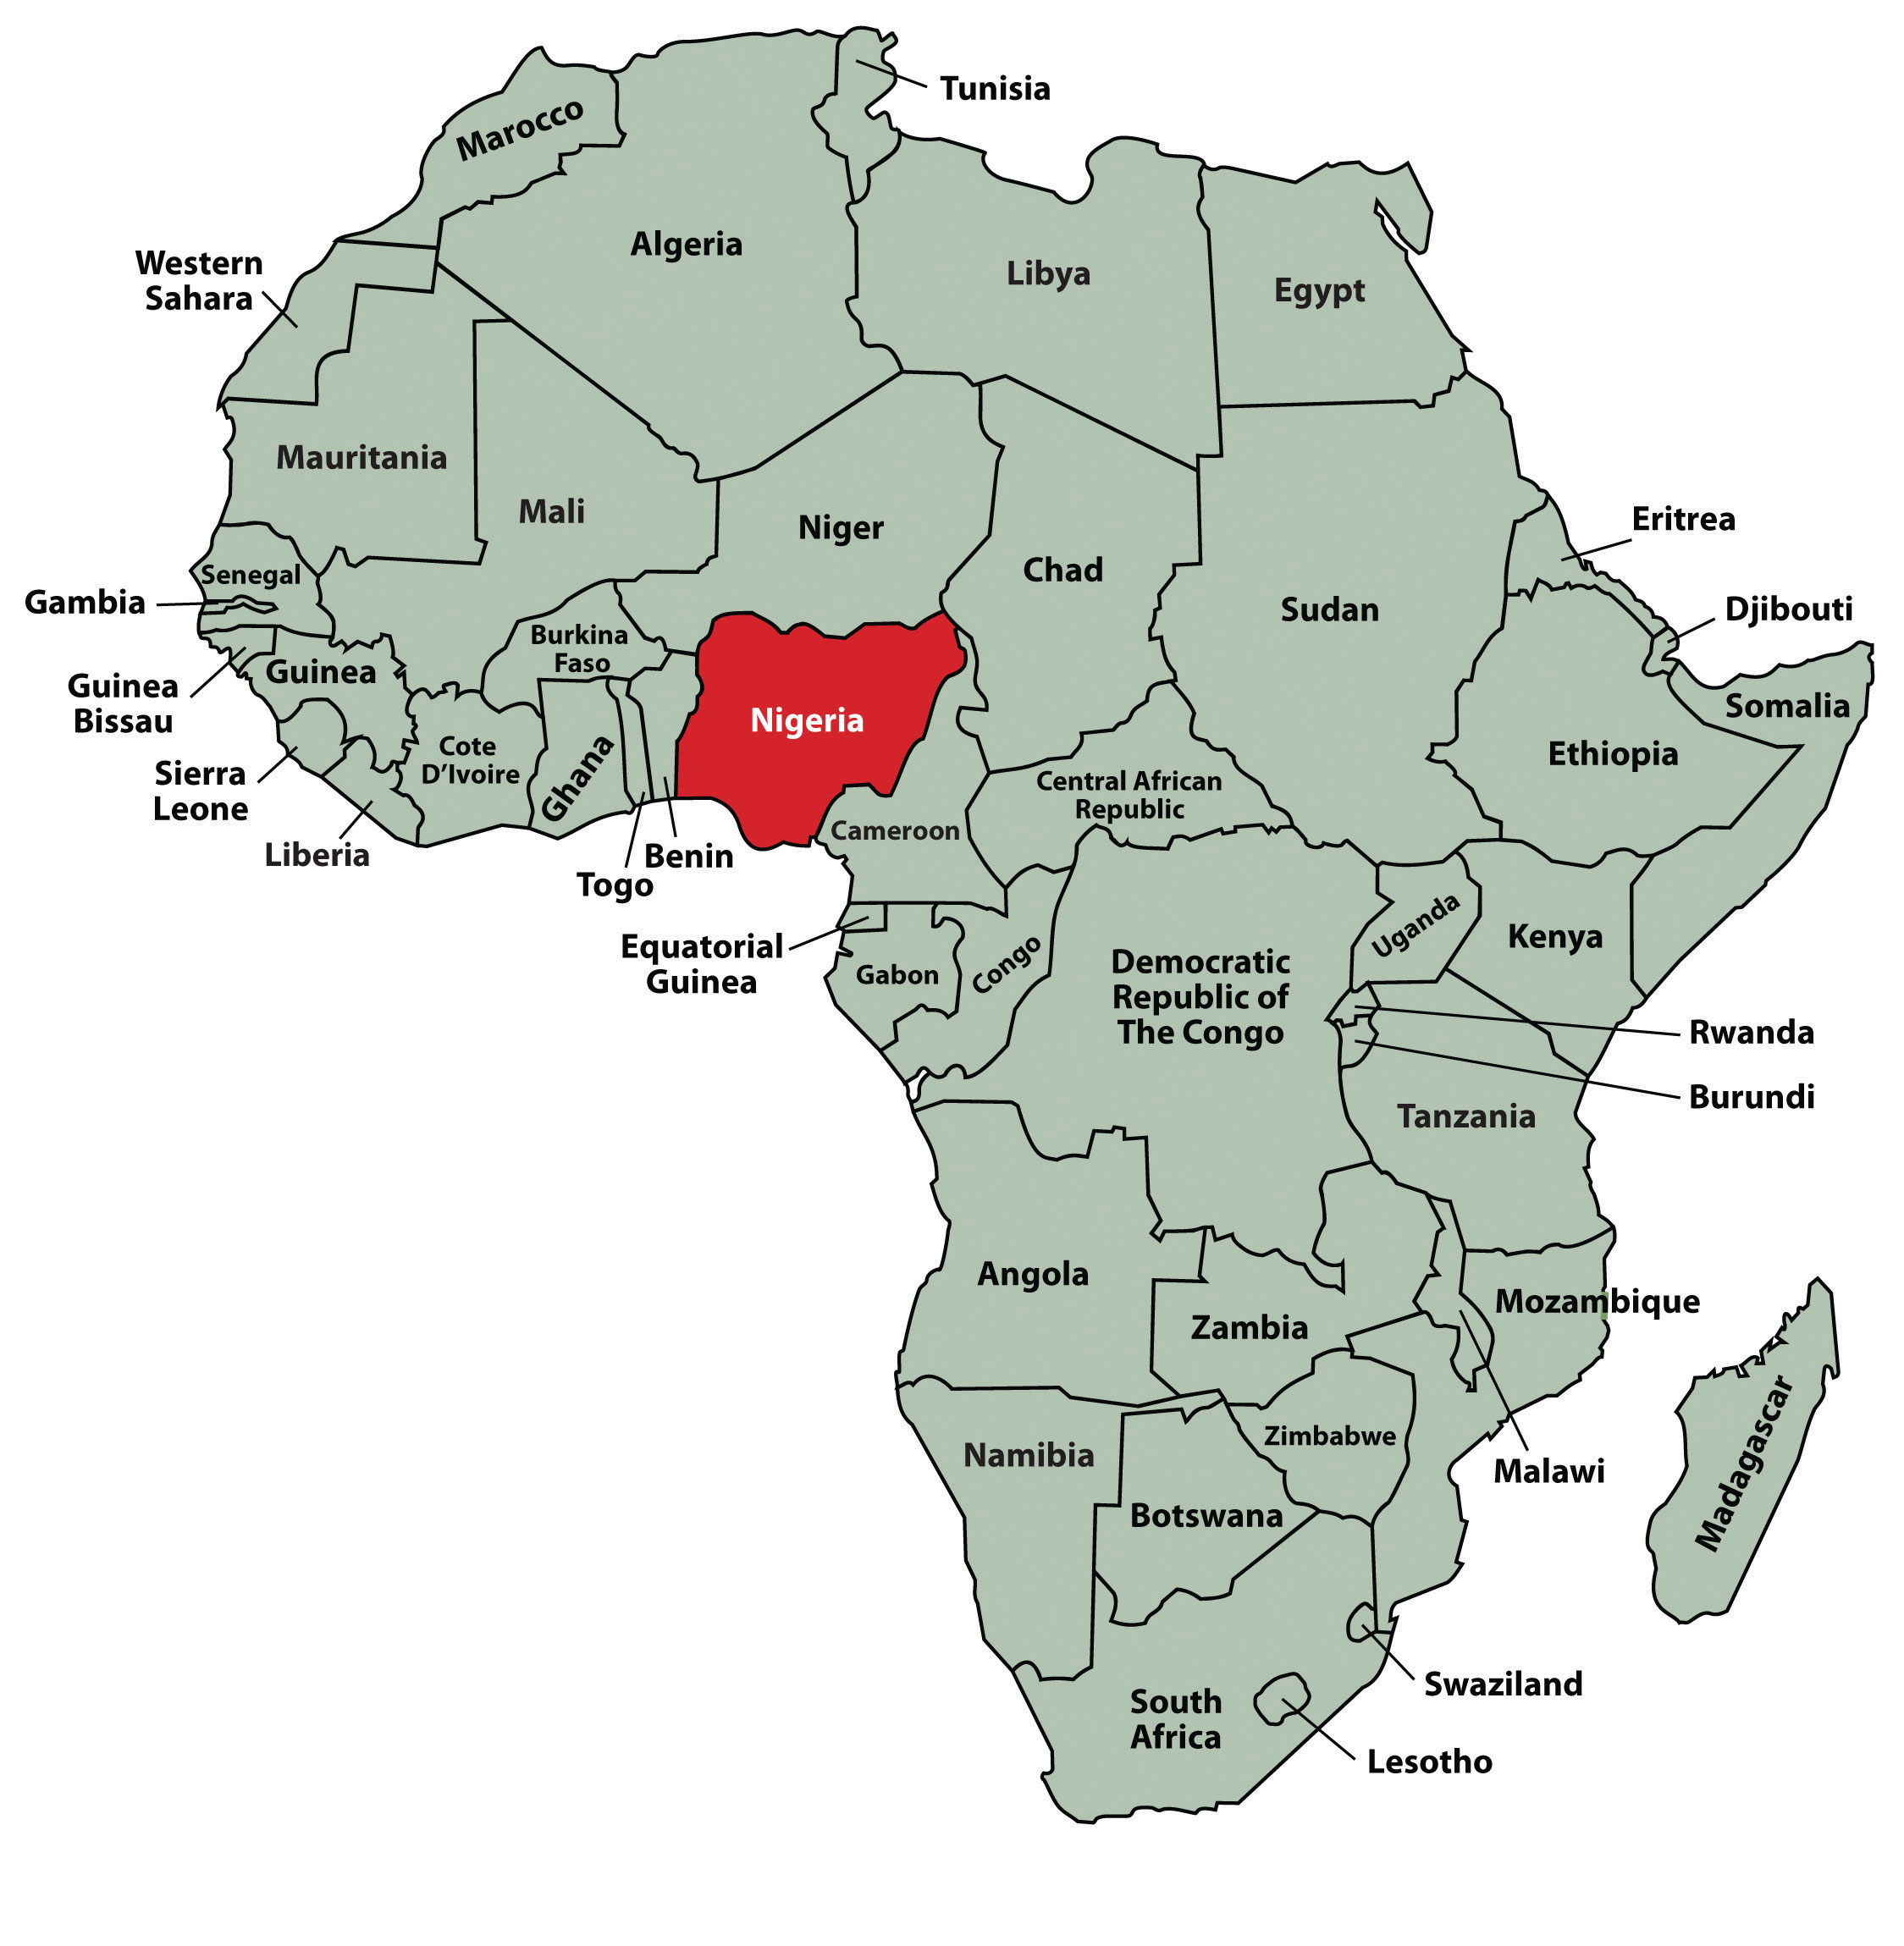 variety-happen-to-low-lure-less-illumination-extra-than-small-point-large-map-of-africa-showing-nigeria-of-map-of-africa-showing-nigeria.jpg